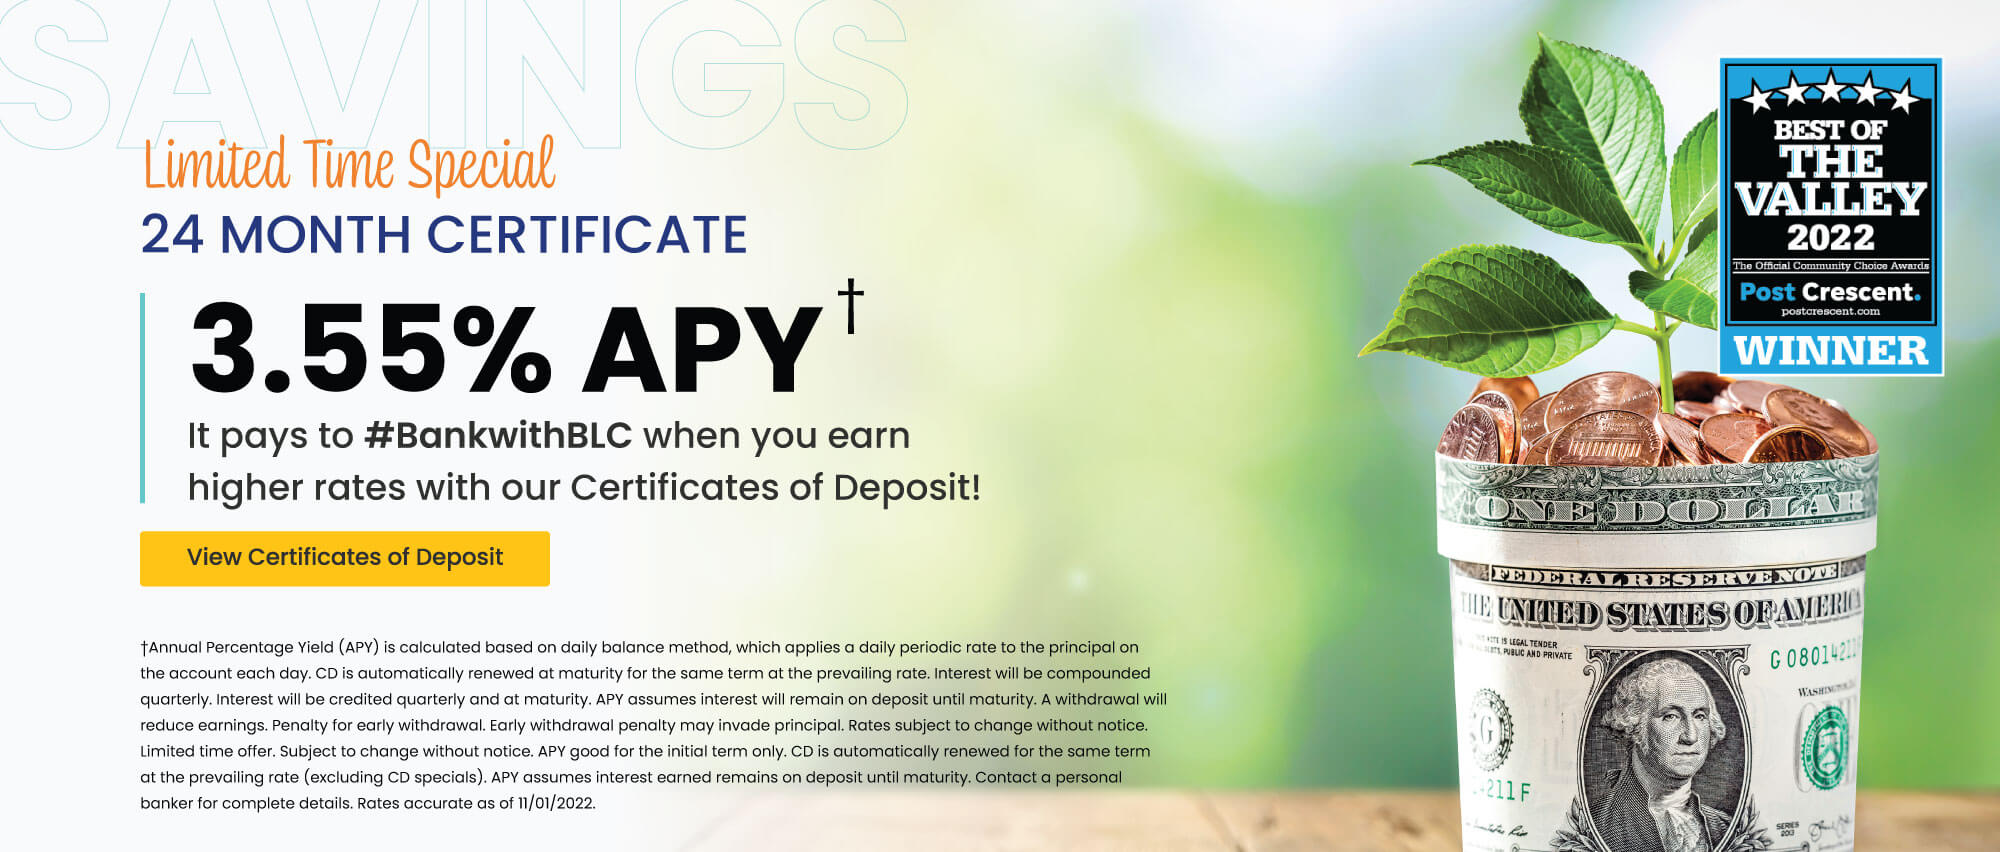 Limited Time Special 24 Month Certificate - 3.55% APY - It pays to #BankwithBLC when you earn higher rates with our Certificates of Deposit. Click here for details.